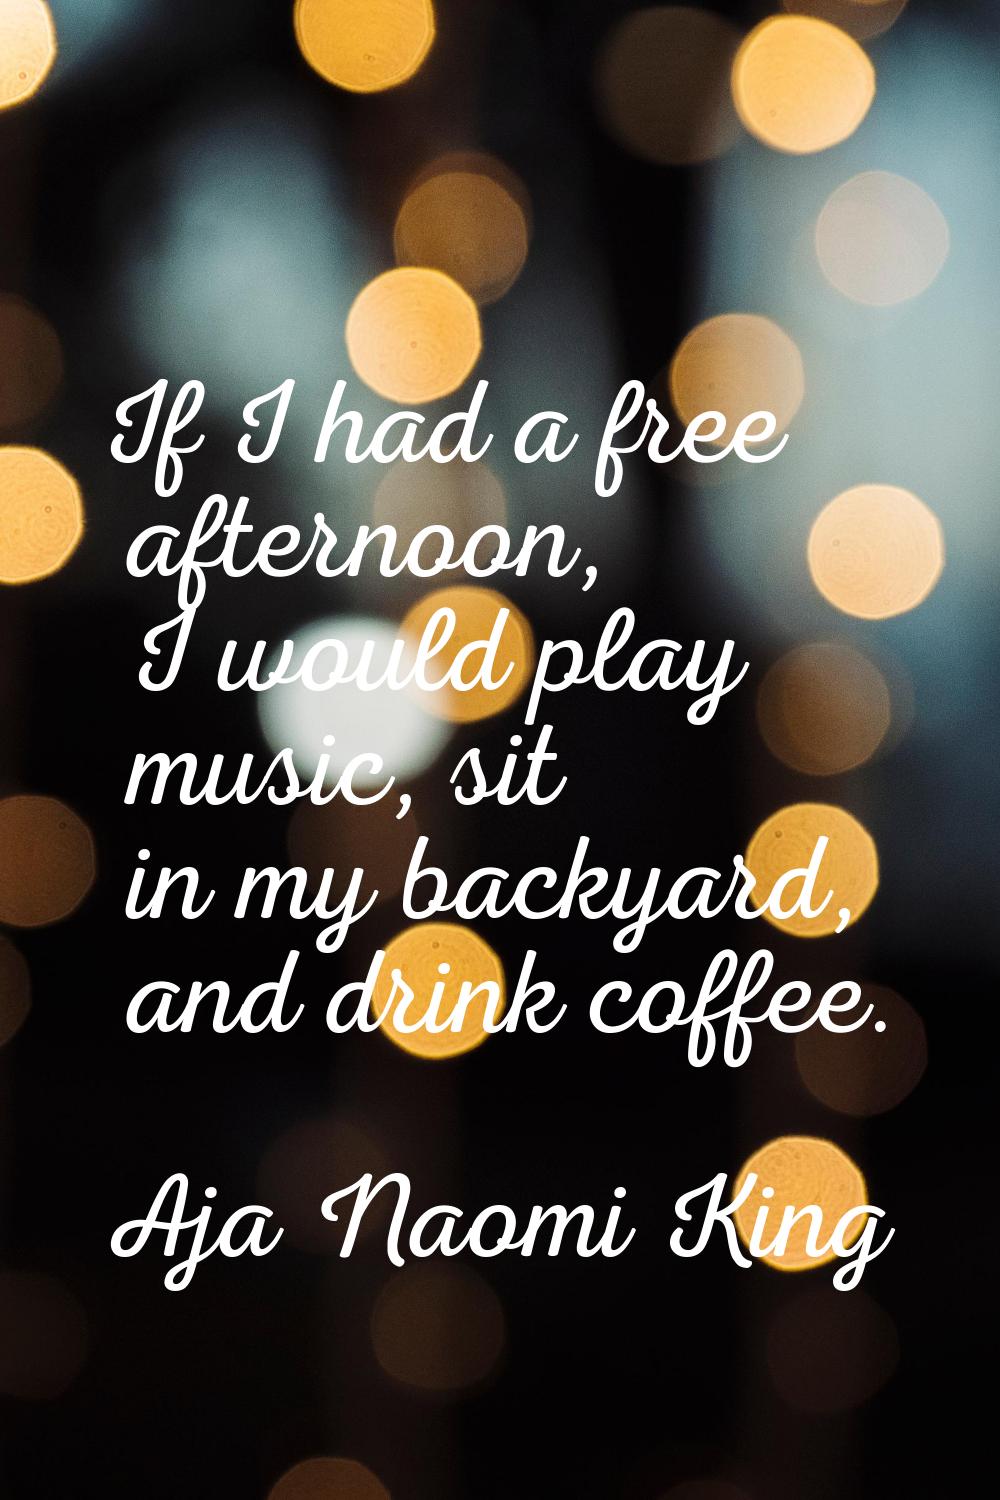 If I had a free afternoon, I would play music, sit in my backyard, and drink coffee.